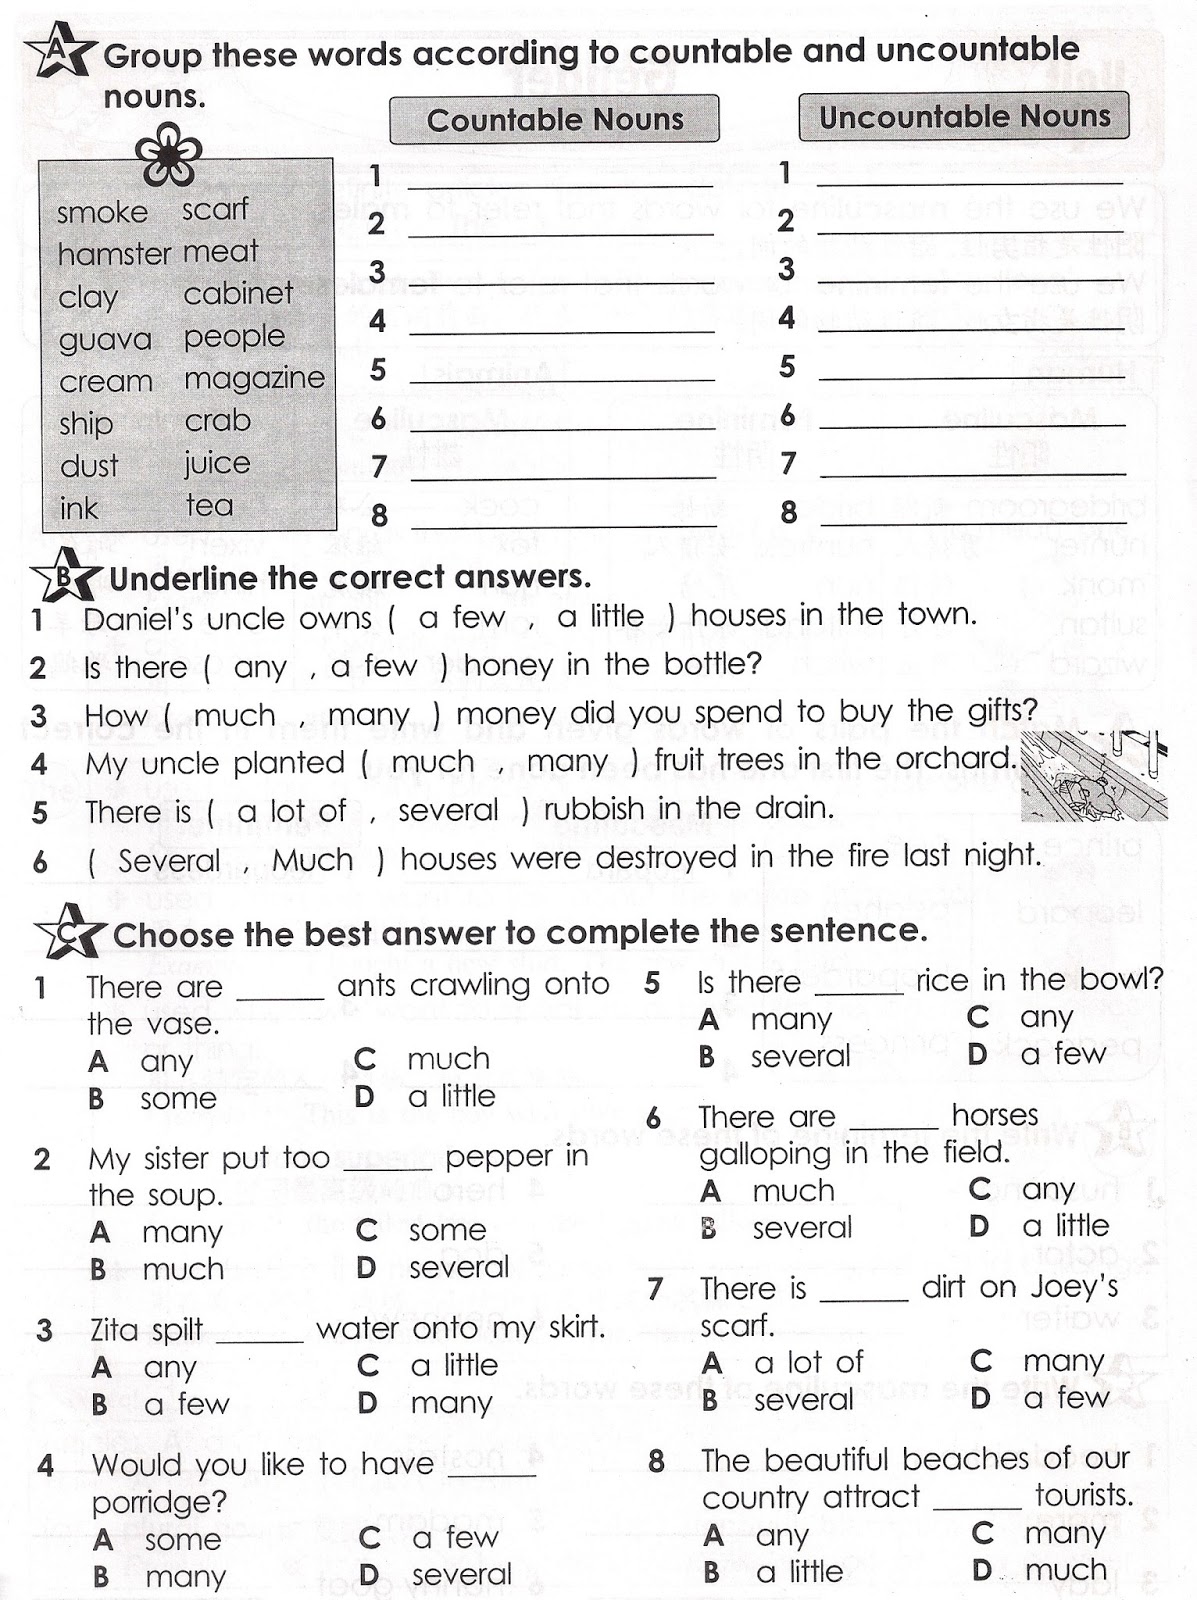 World Of English Usage Grammar Exercise Countable Uncountable Nouns